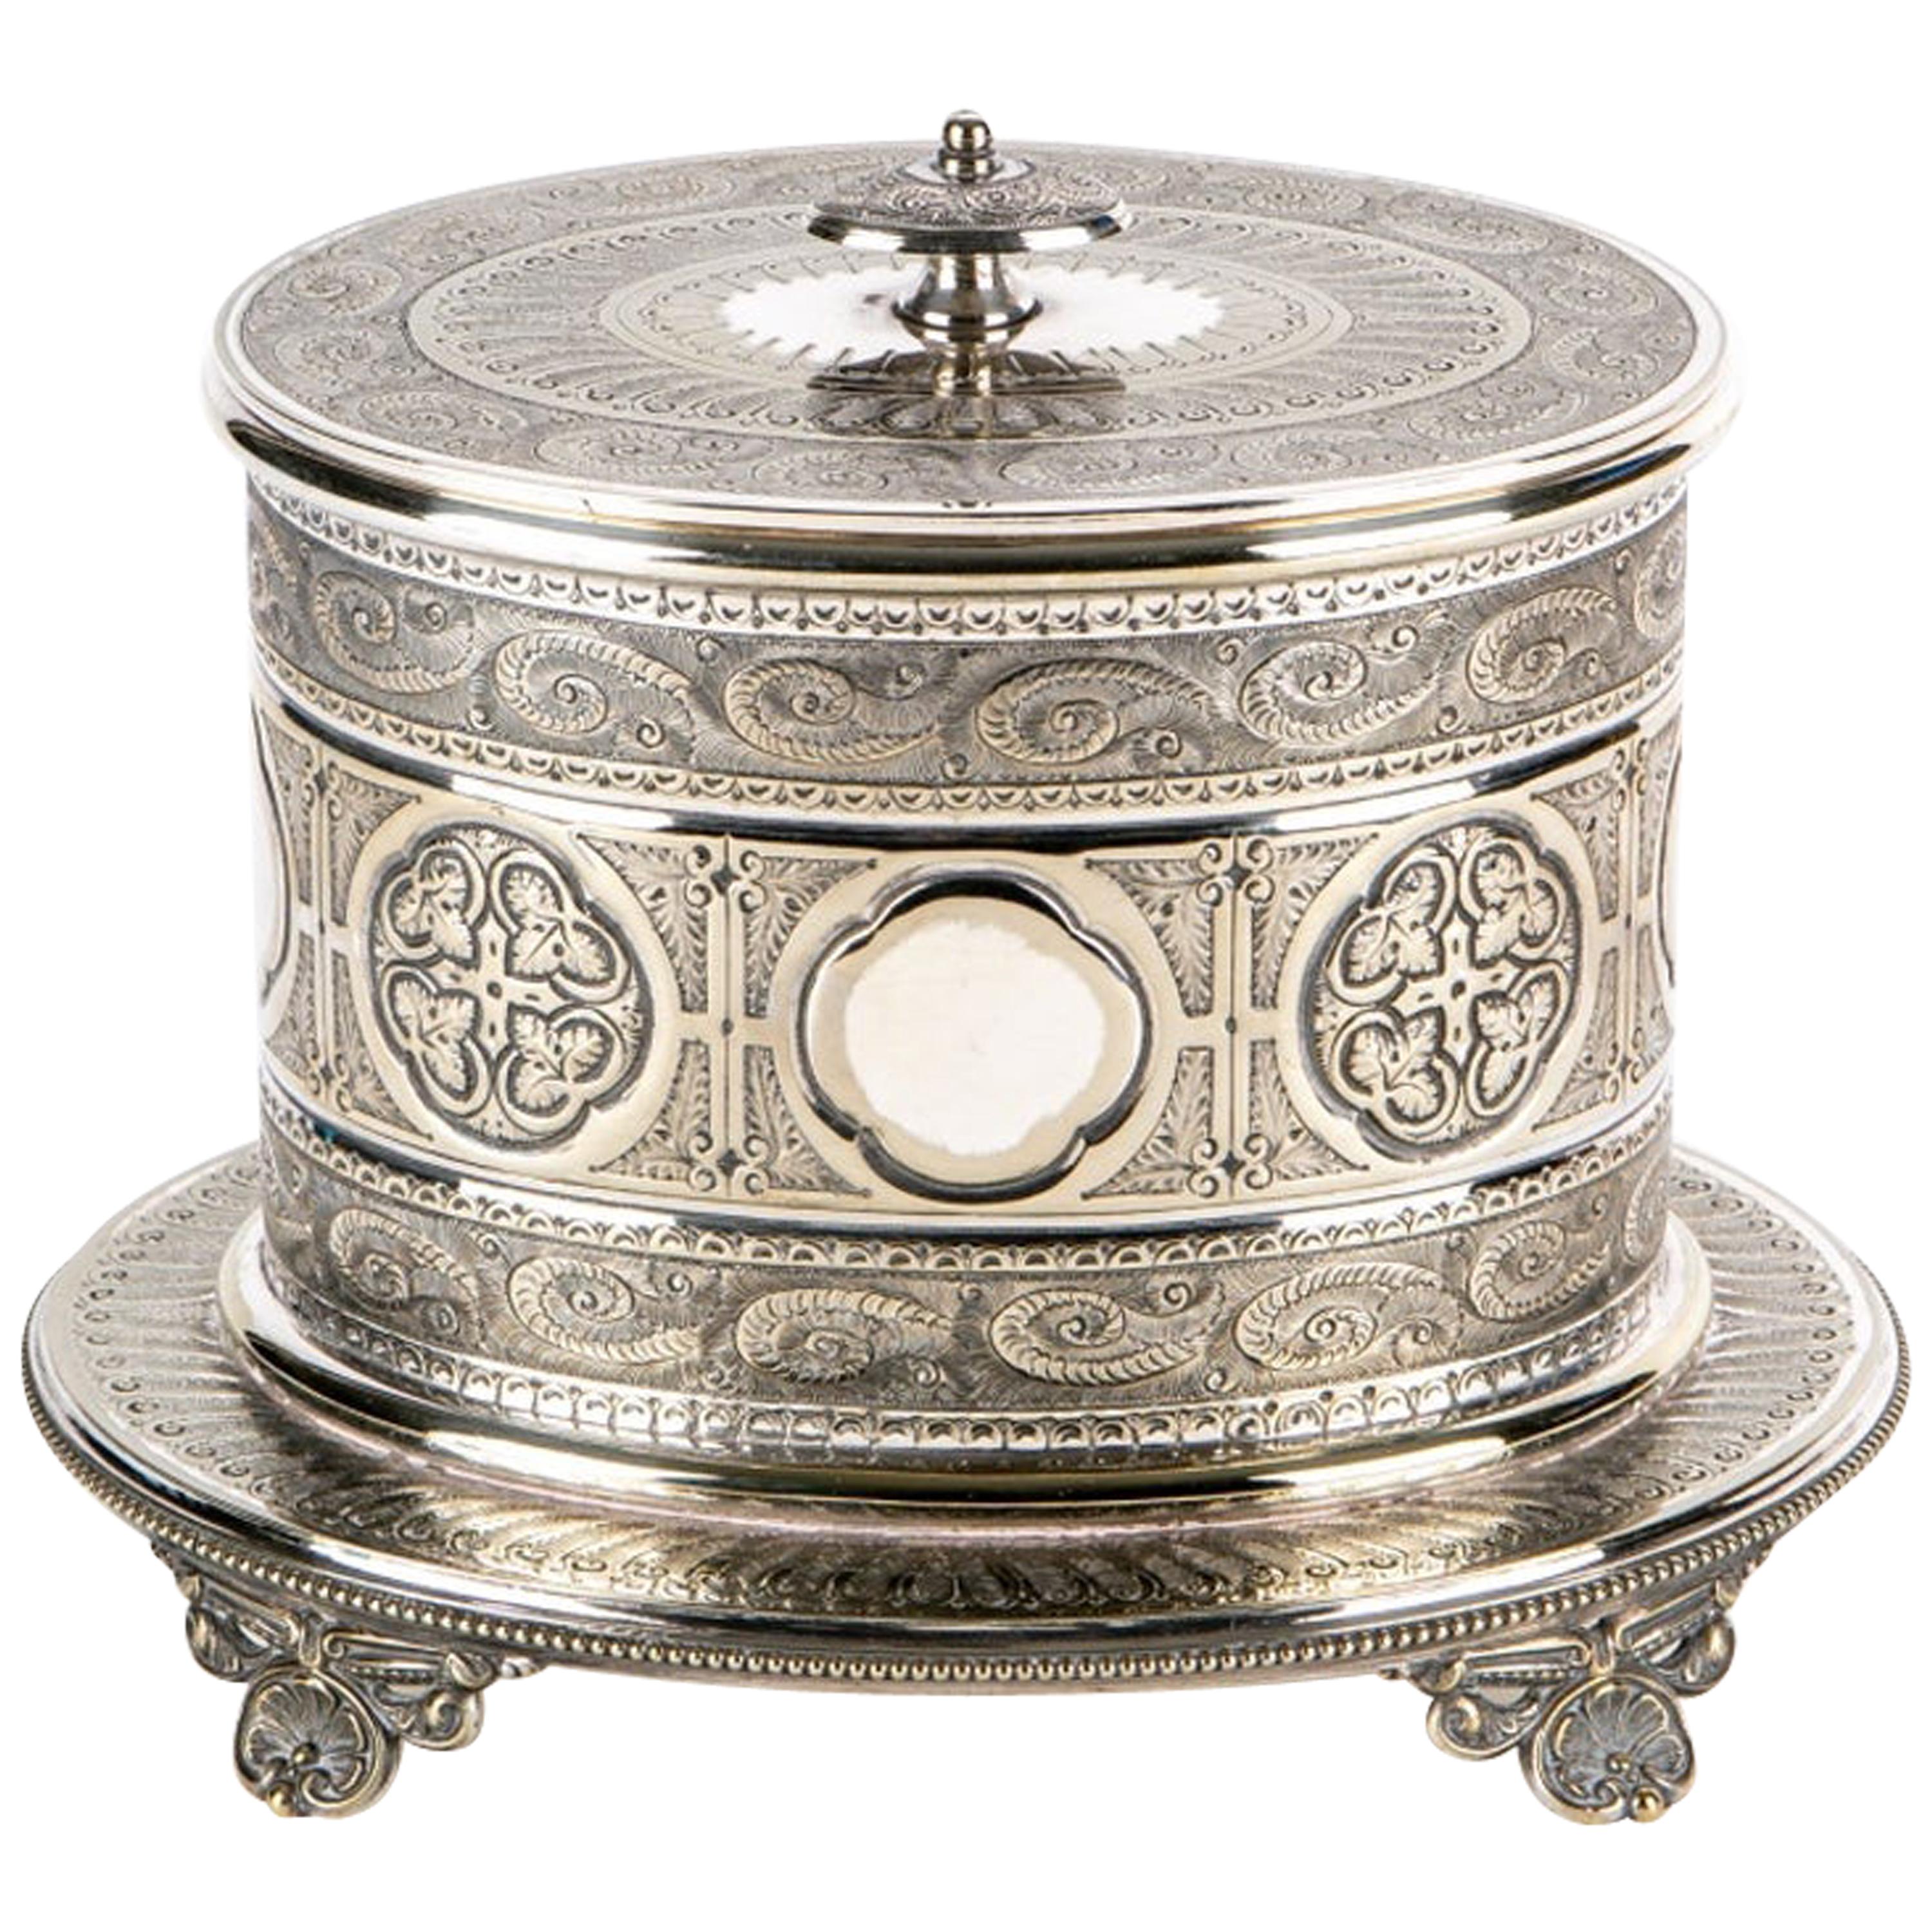 Antique Oval Silver Plate Biscuit Box